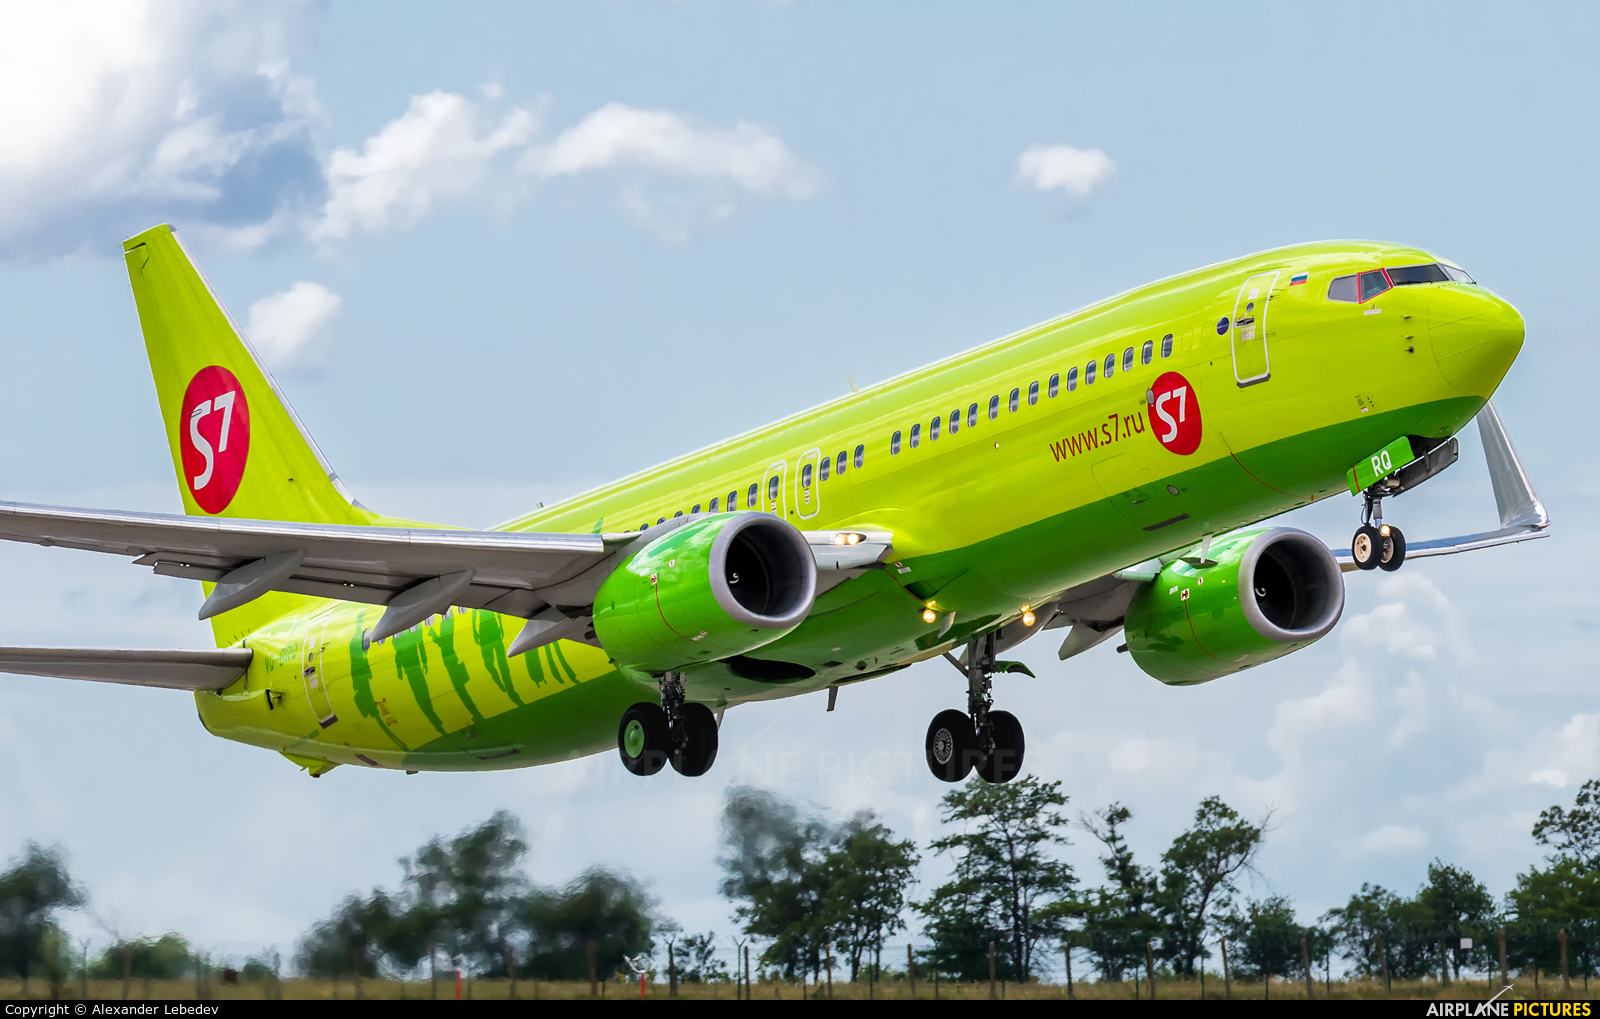 Siberia Airlines VQ-BRQ aircraft at Undisclosed Location